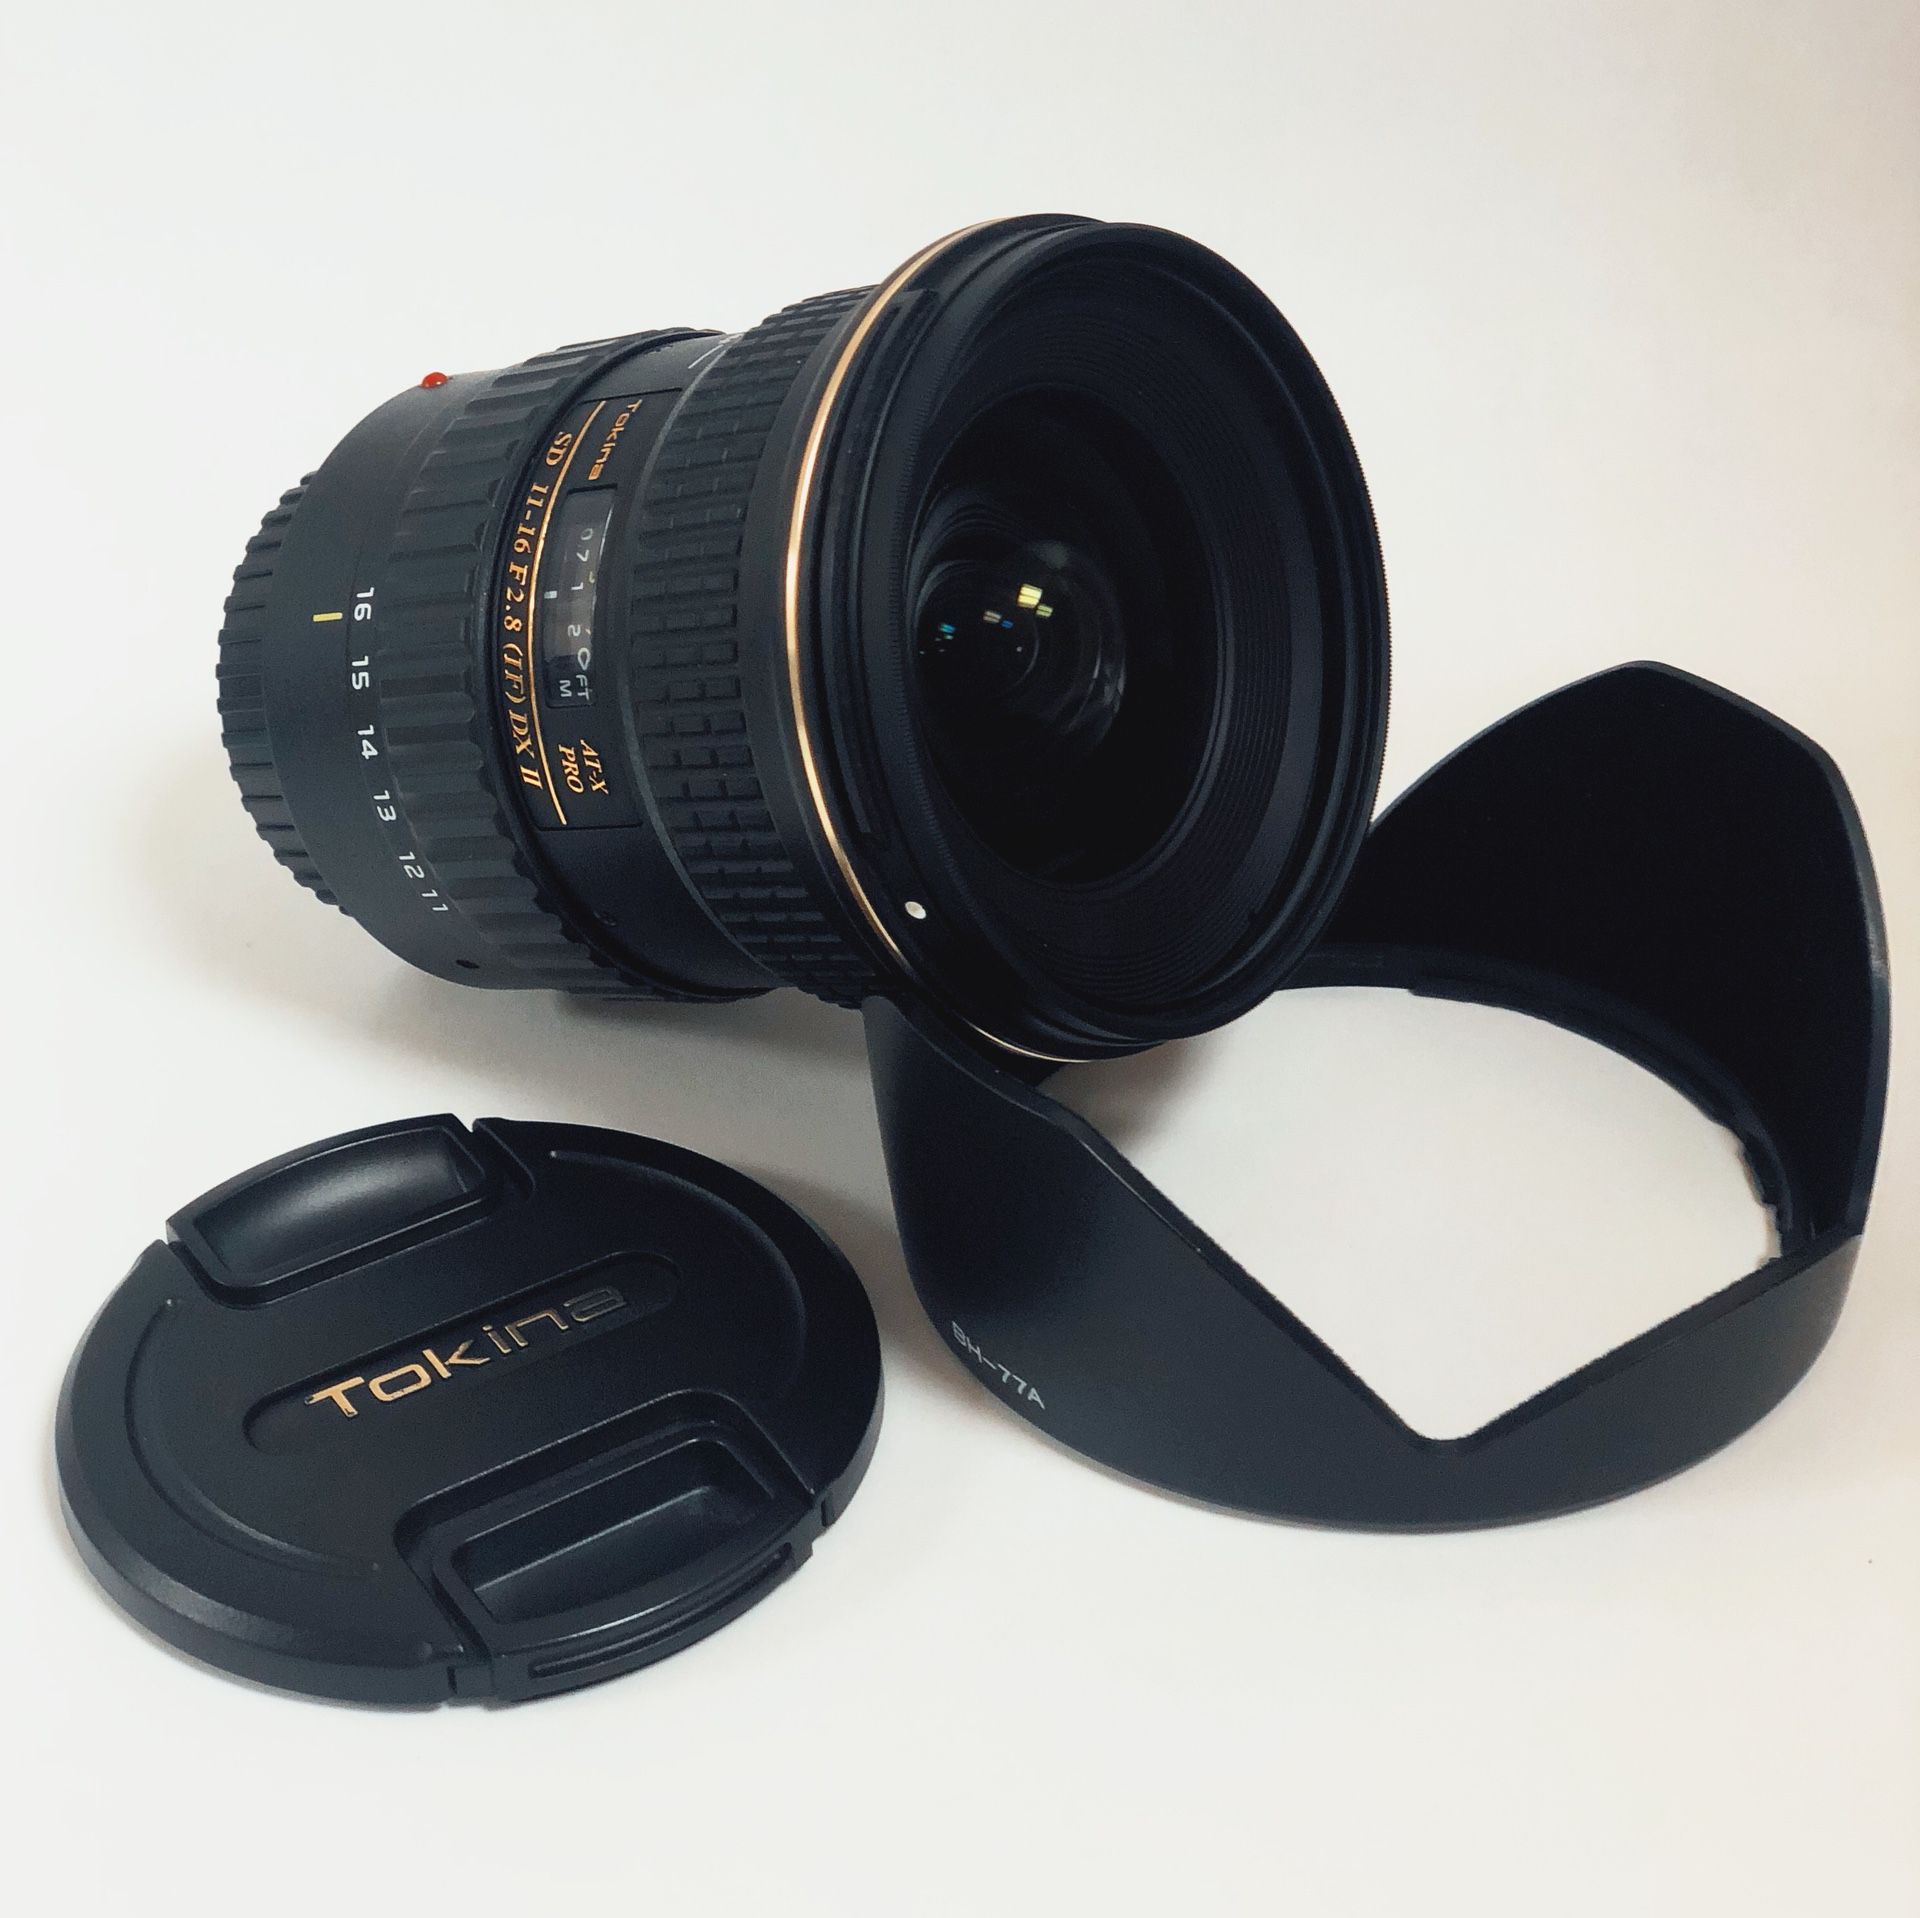 Tokina 11-16mm f/2.8 for Canon